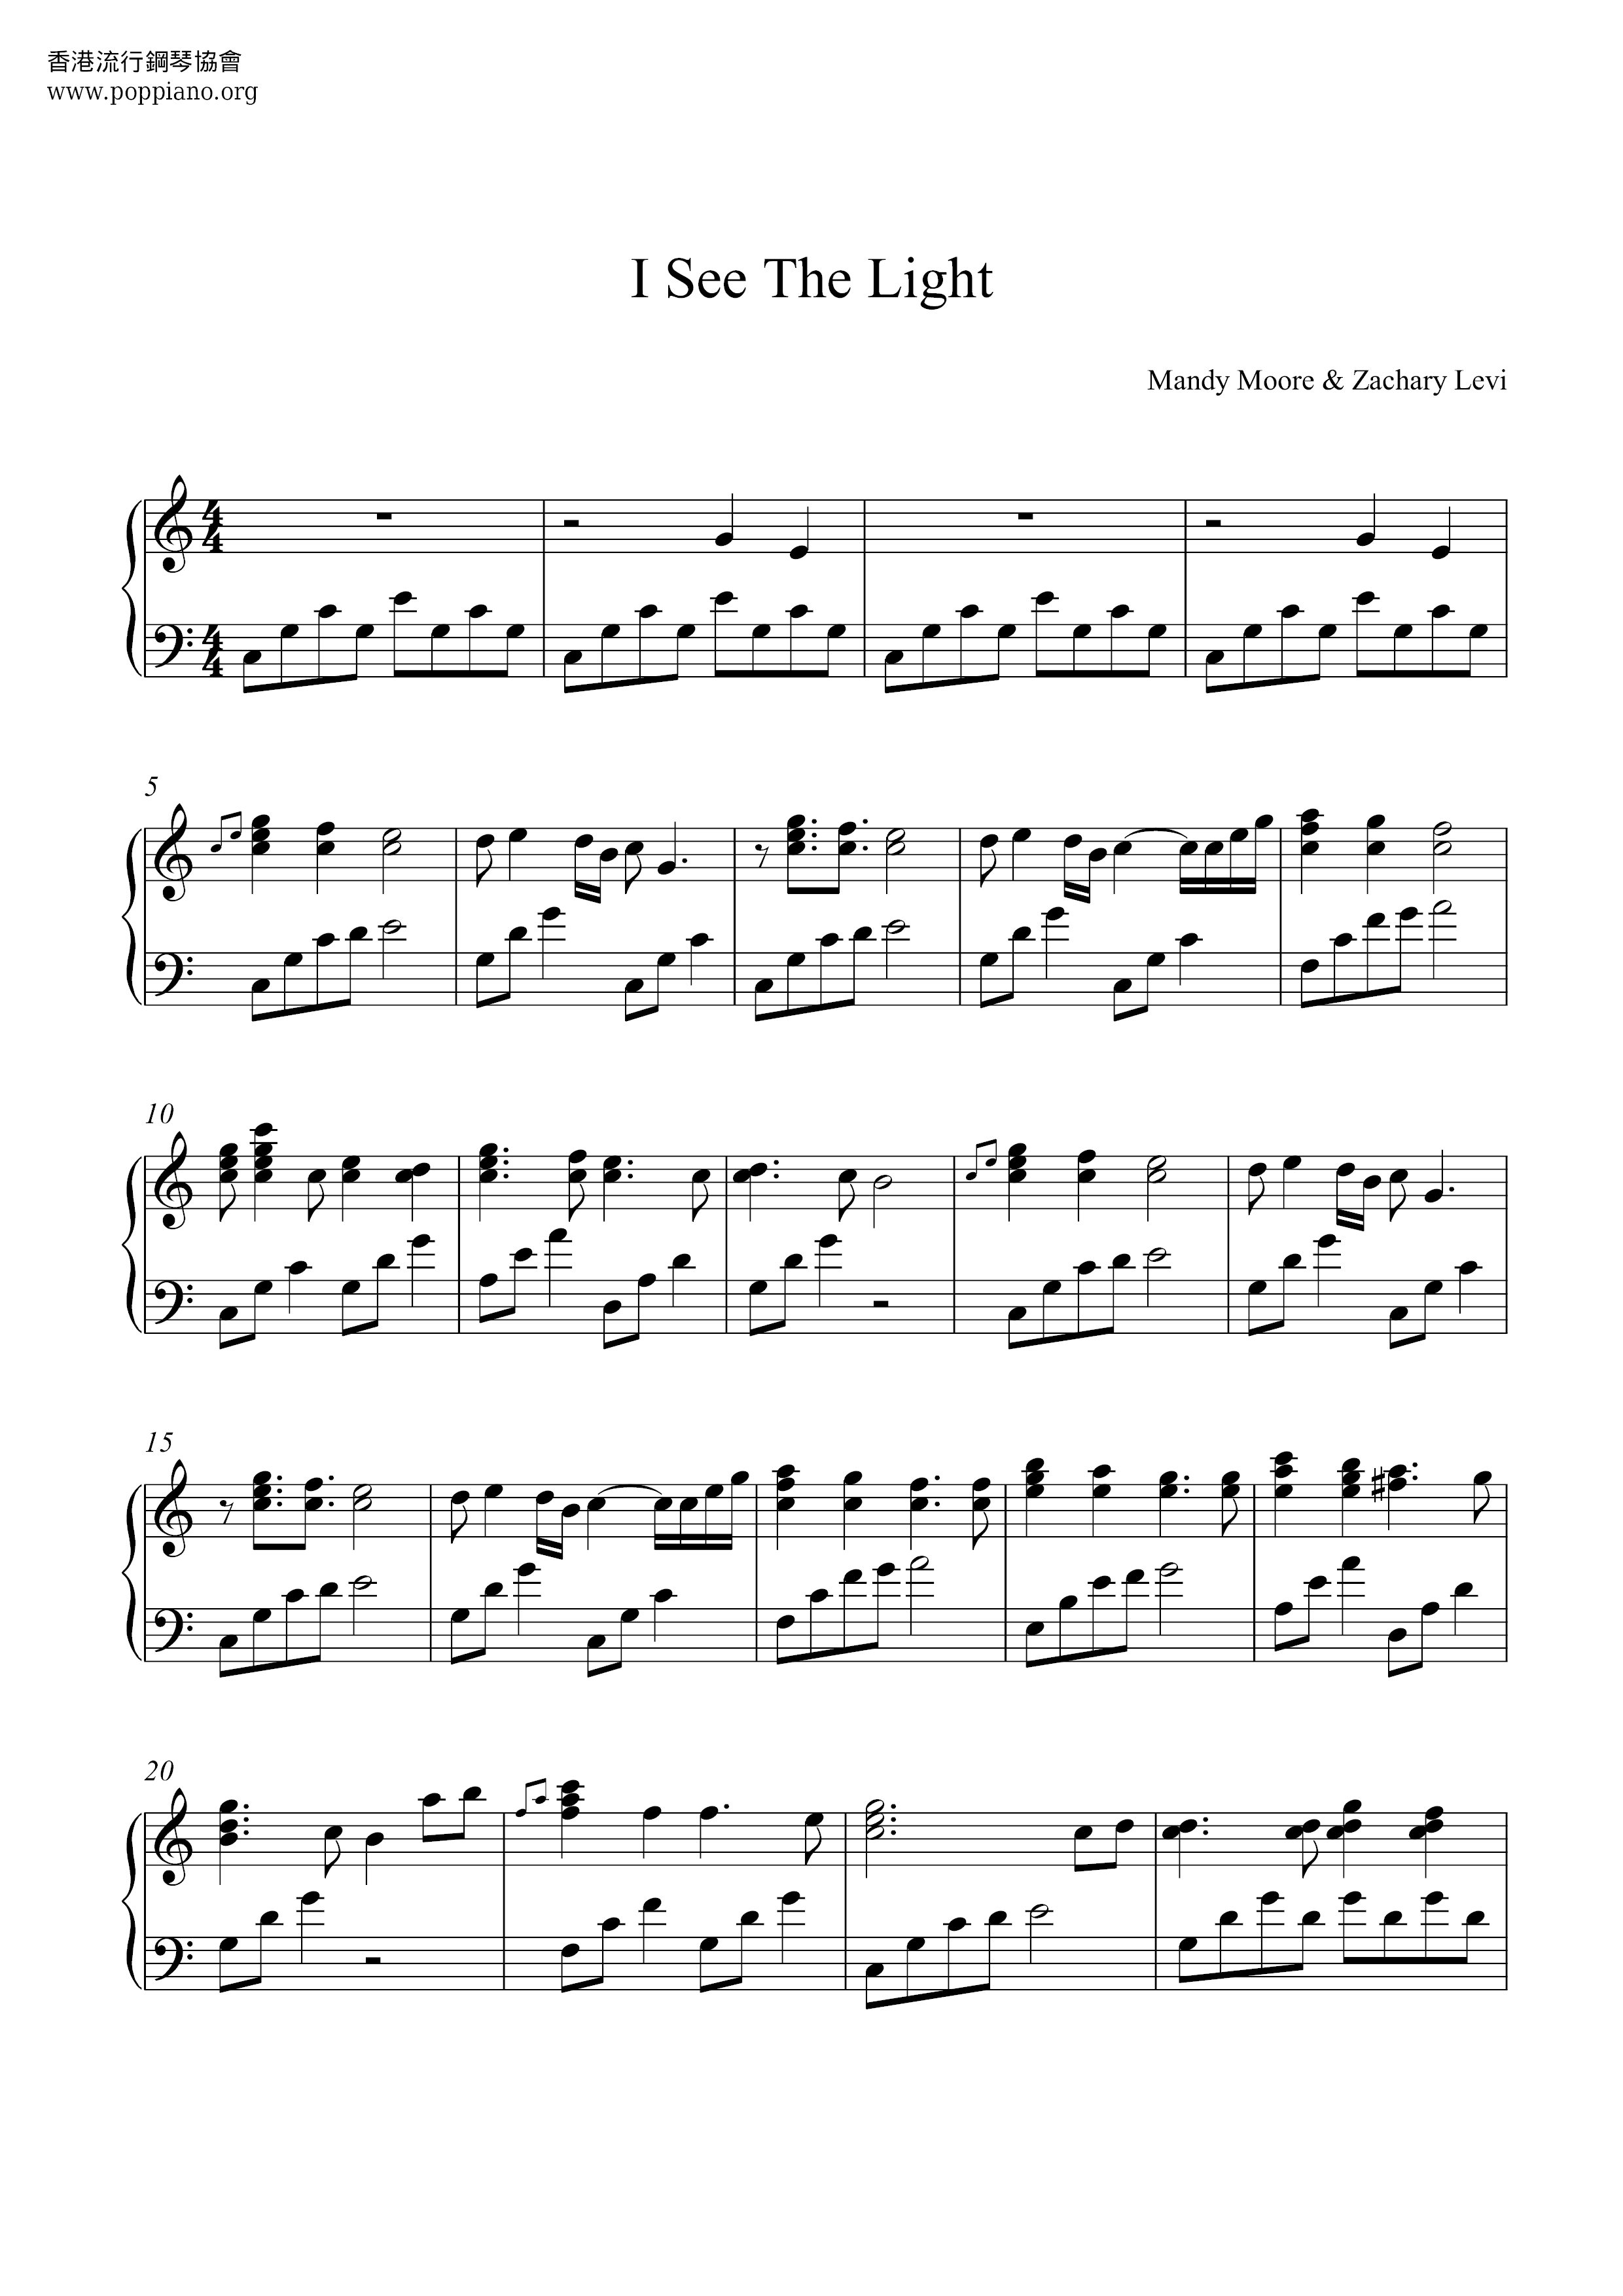 I See the Light - From Tangled Score